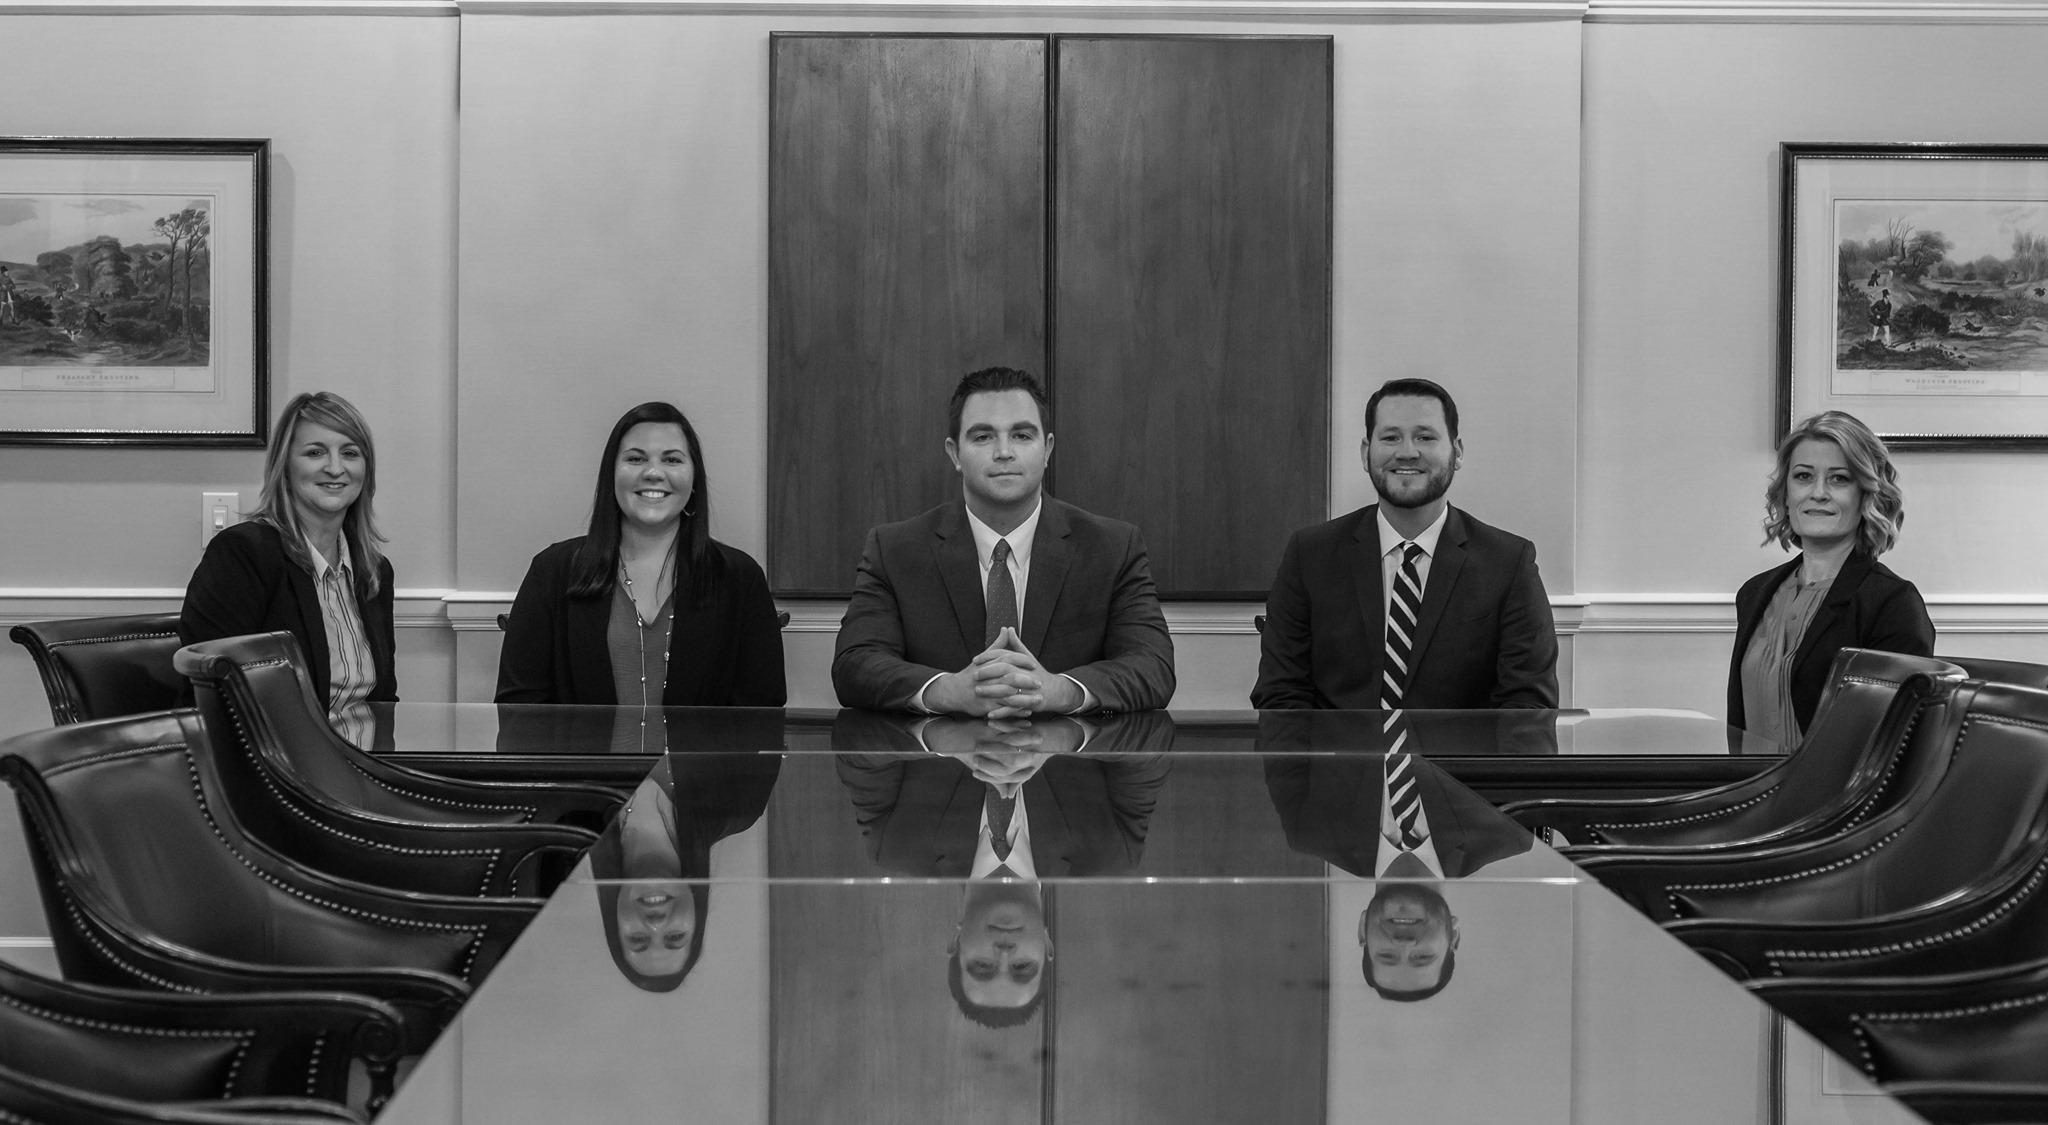 The Shrable Law Firm, P.C. Injury and Accident Attorneys | 624 Pointe N Blvd, Albany, GA 31721, United States | Phone: (229) 349-6291